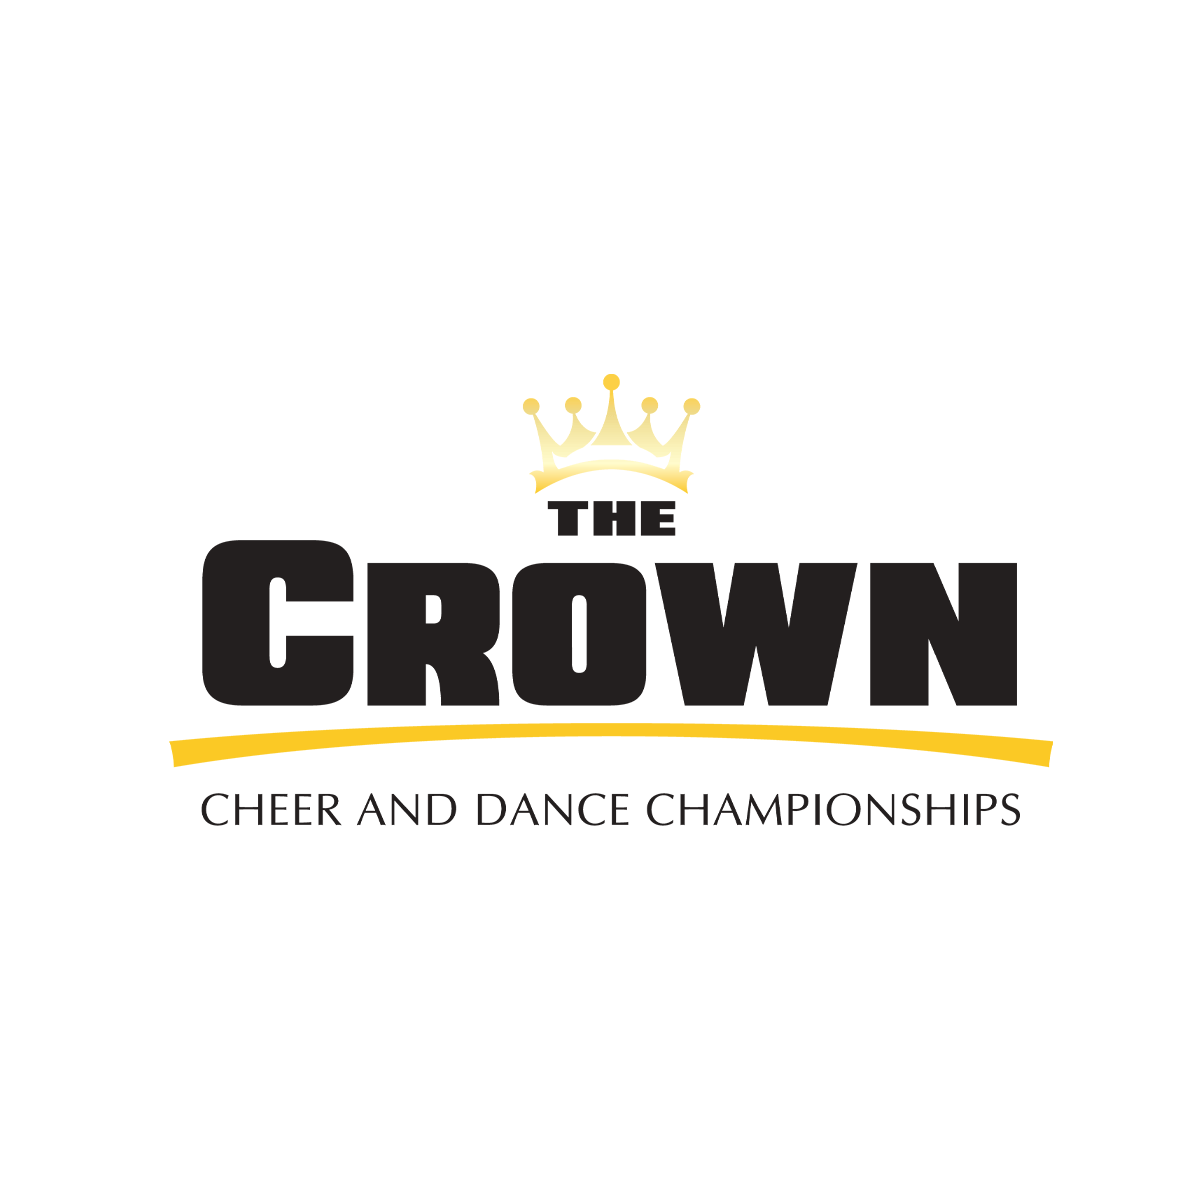 The Central Crown Championship